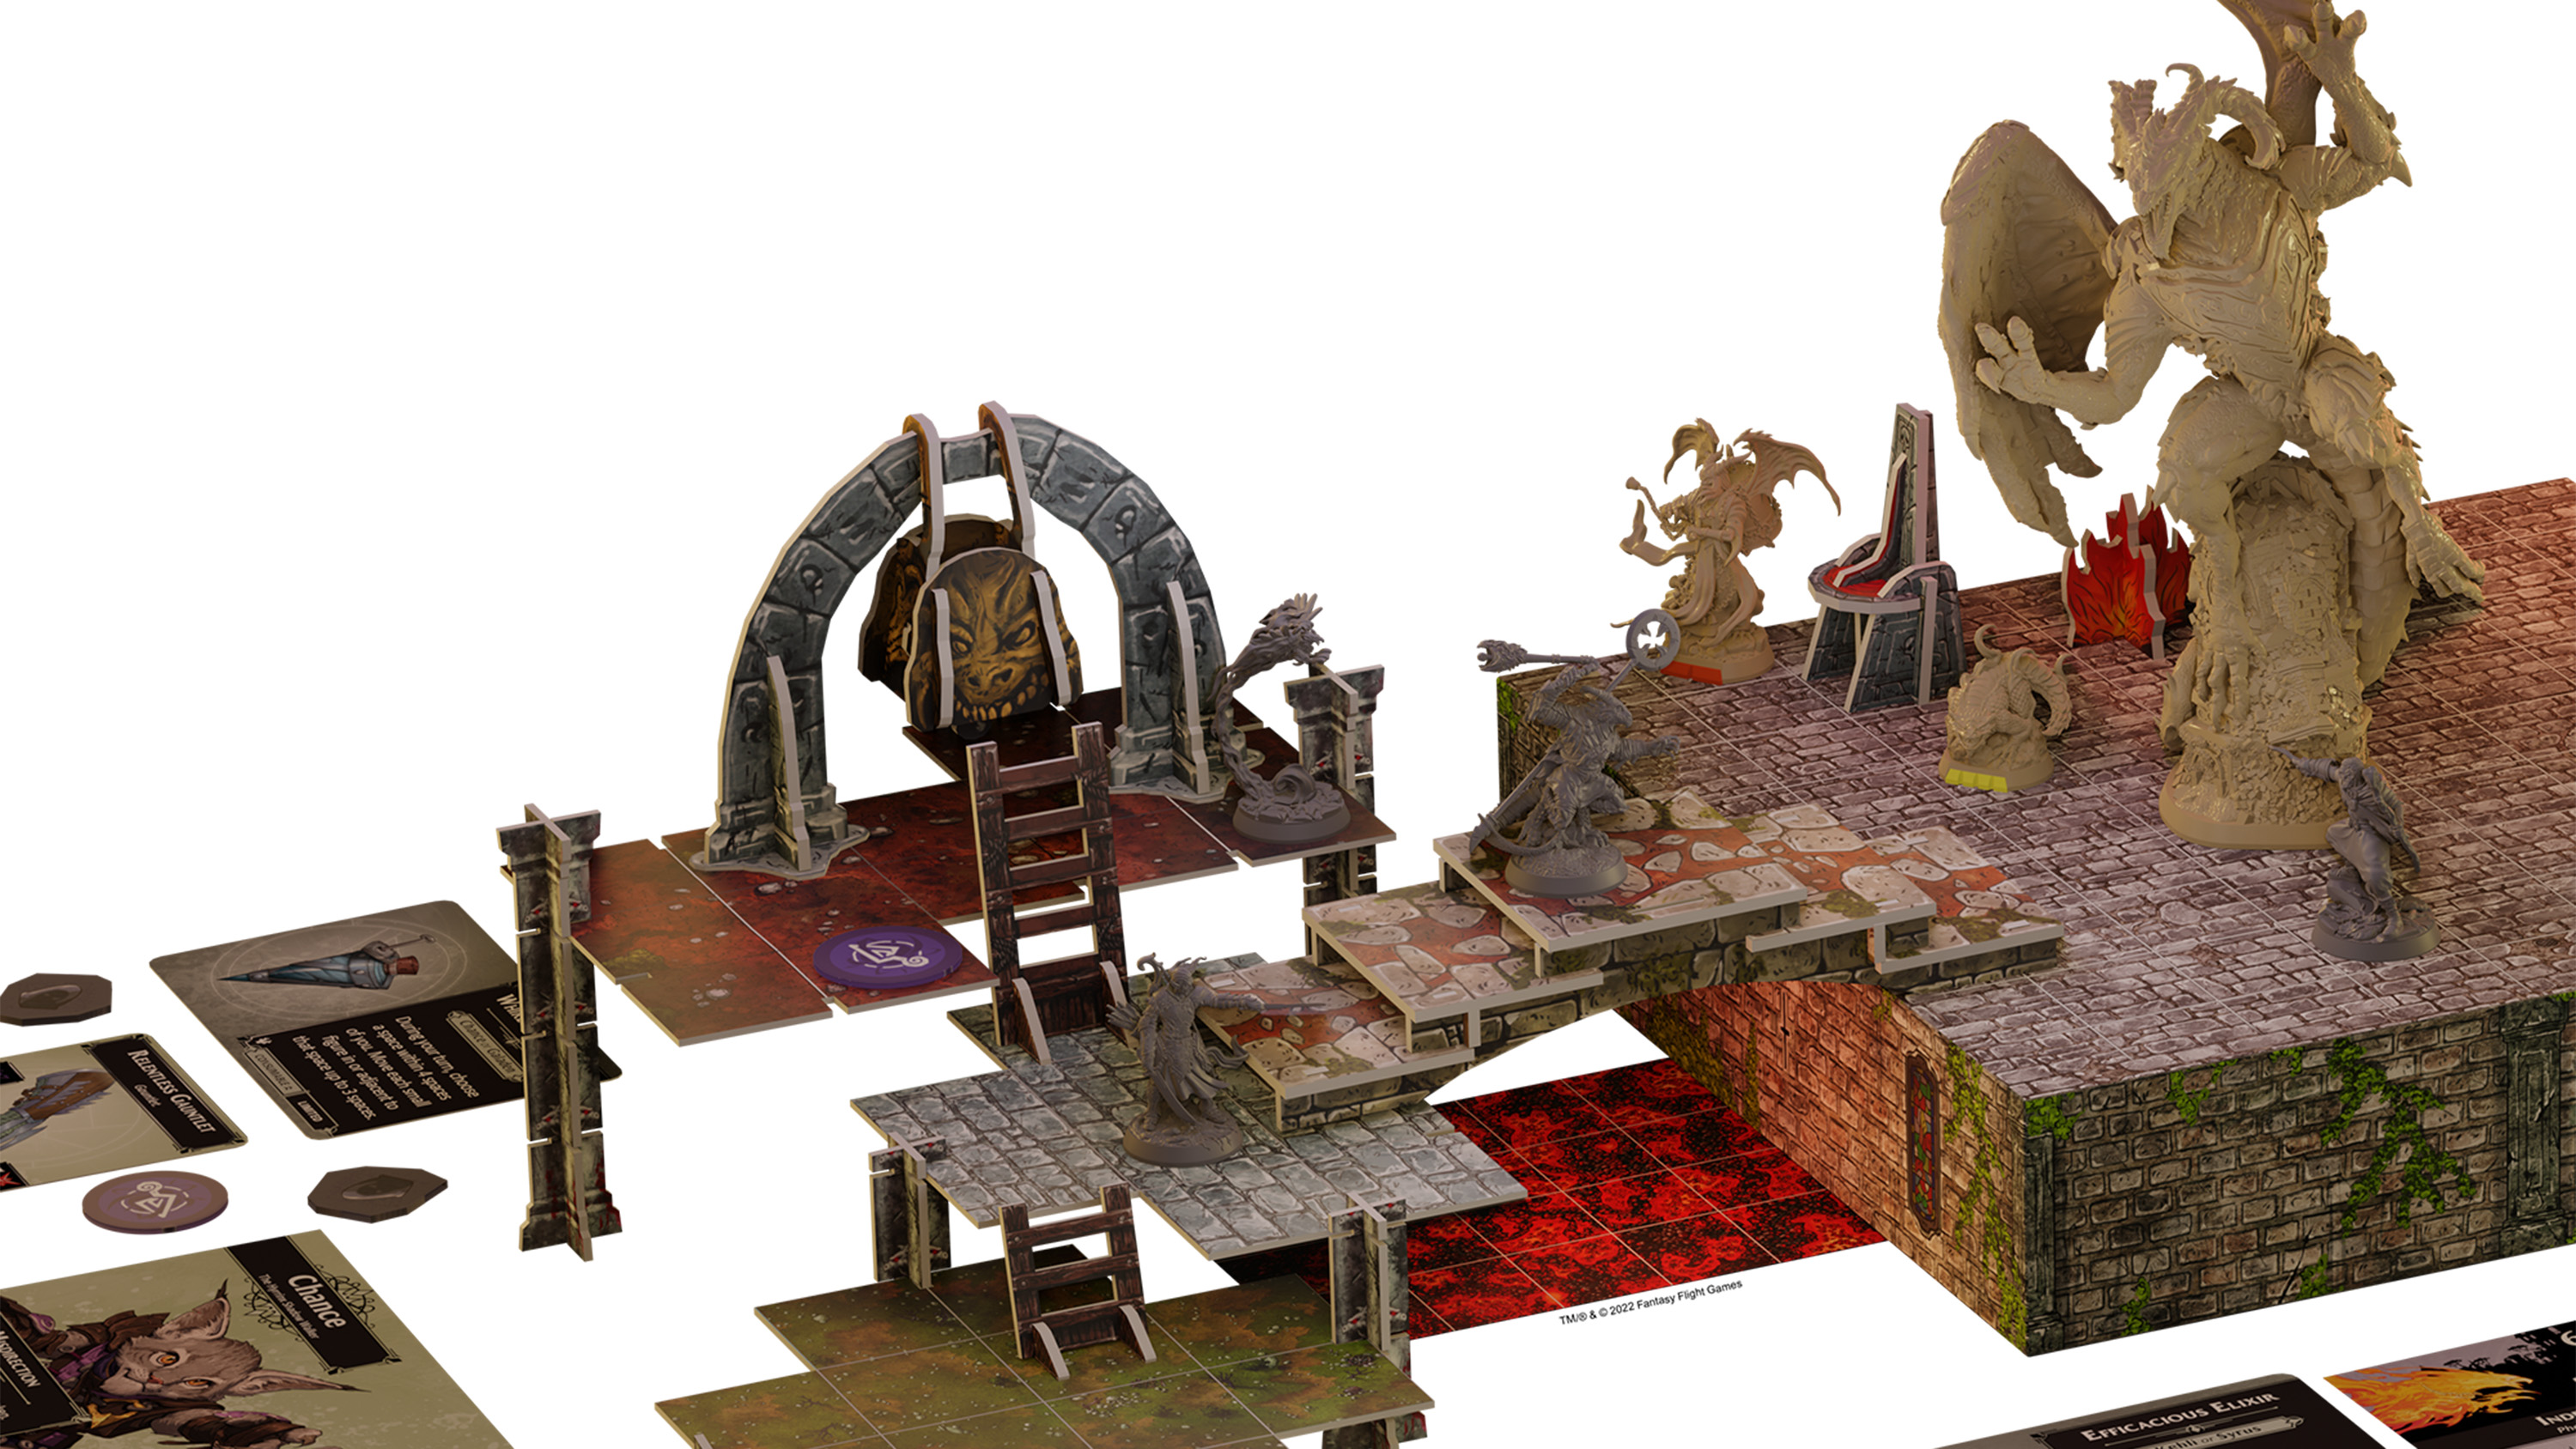 An elaborate game board with several tiers, all supported by cardboard pillars. There’s a bell on one side, and a giant winged creature on the other.